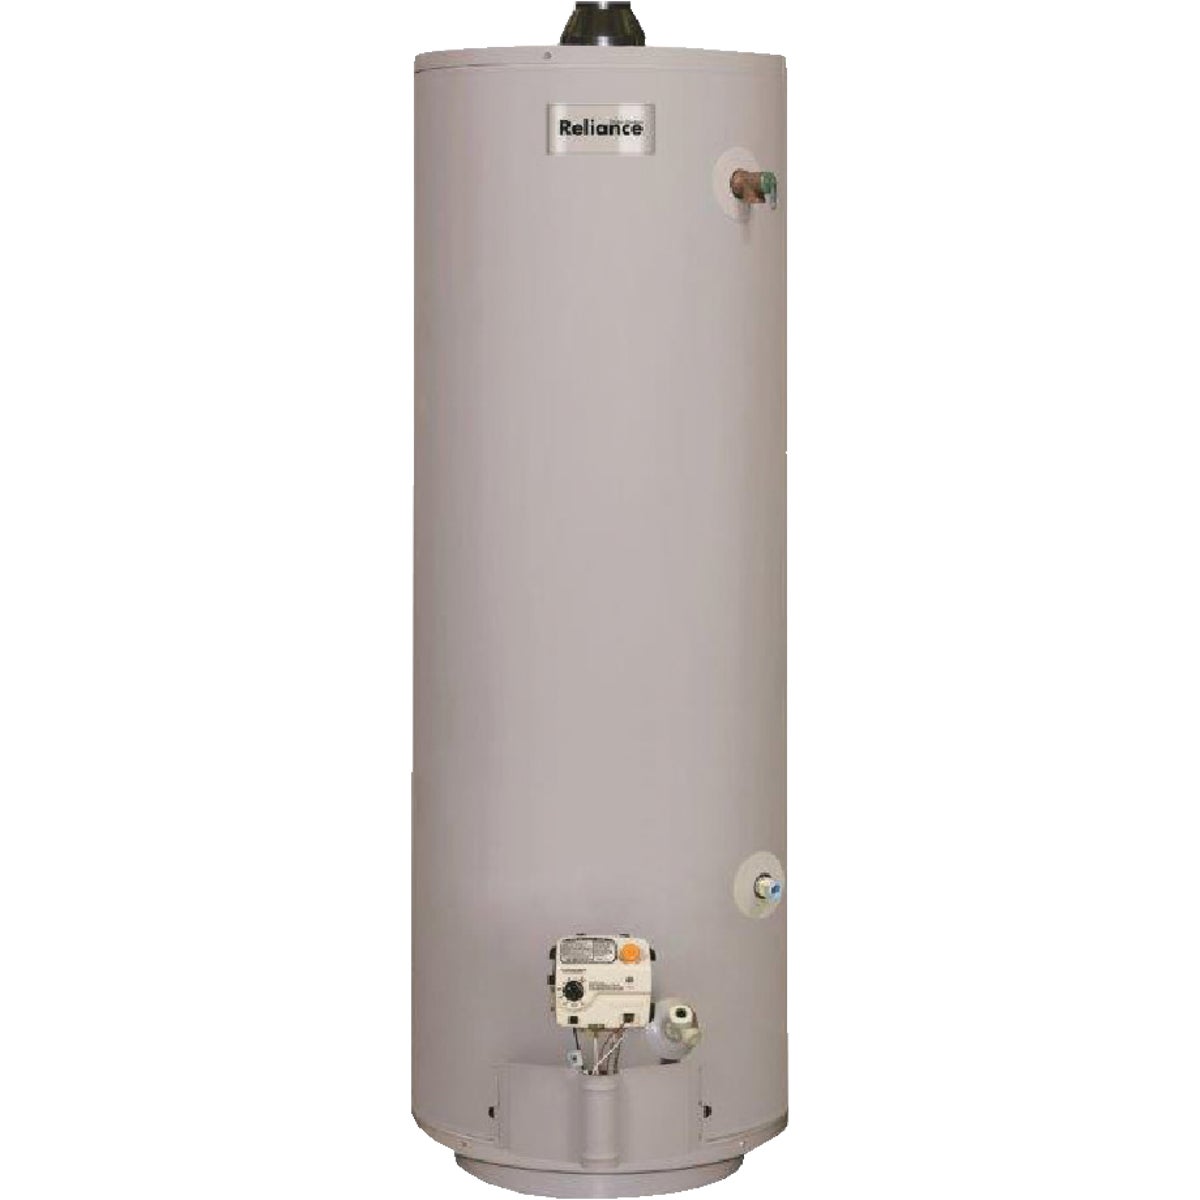 Reliance 30 Gal. Tall 6yr 30,000 BTU Direct Vent Natural Gas/Liquid Propane Water Heater for Mobile Home